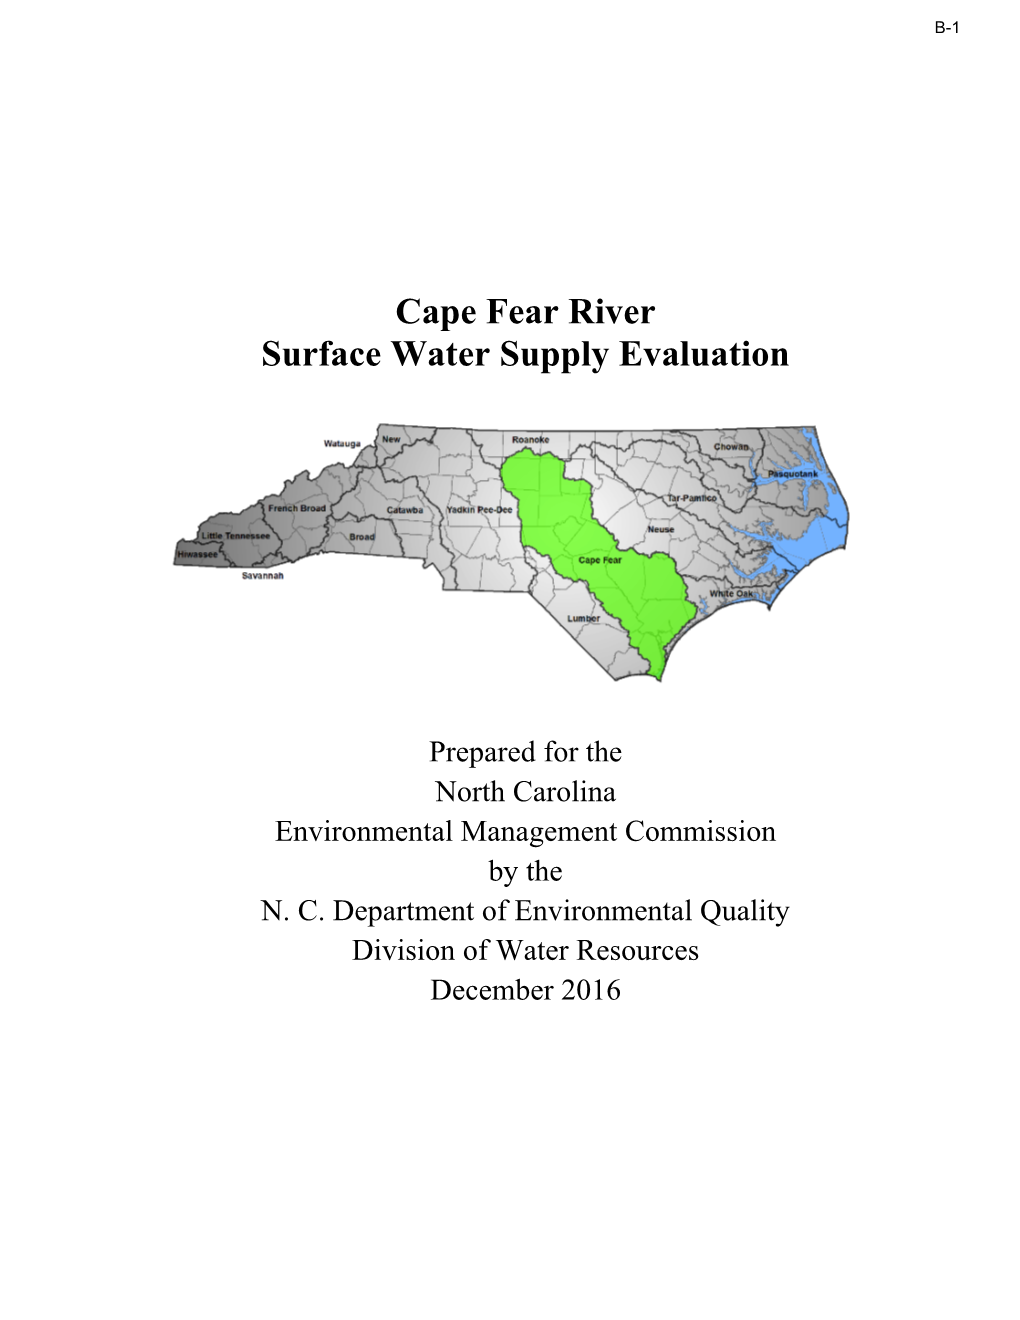 Cape Fear River Surface Water Supply Evaluation